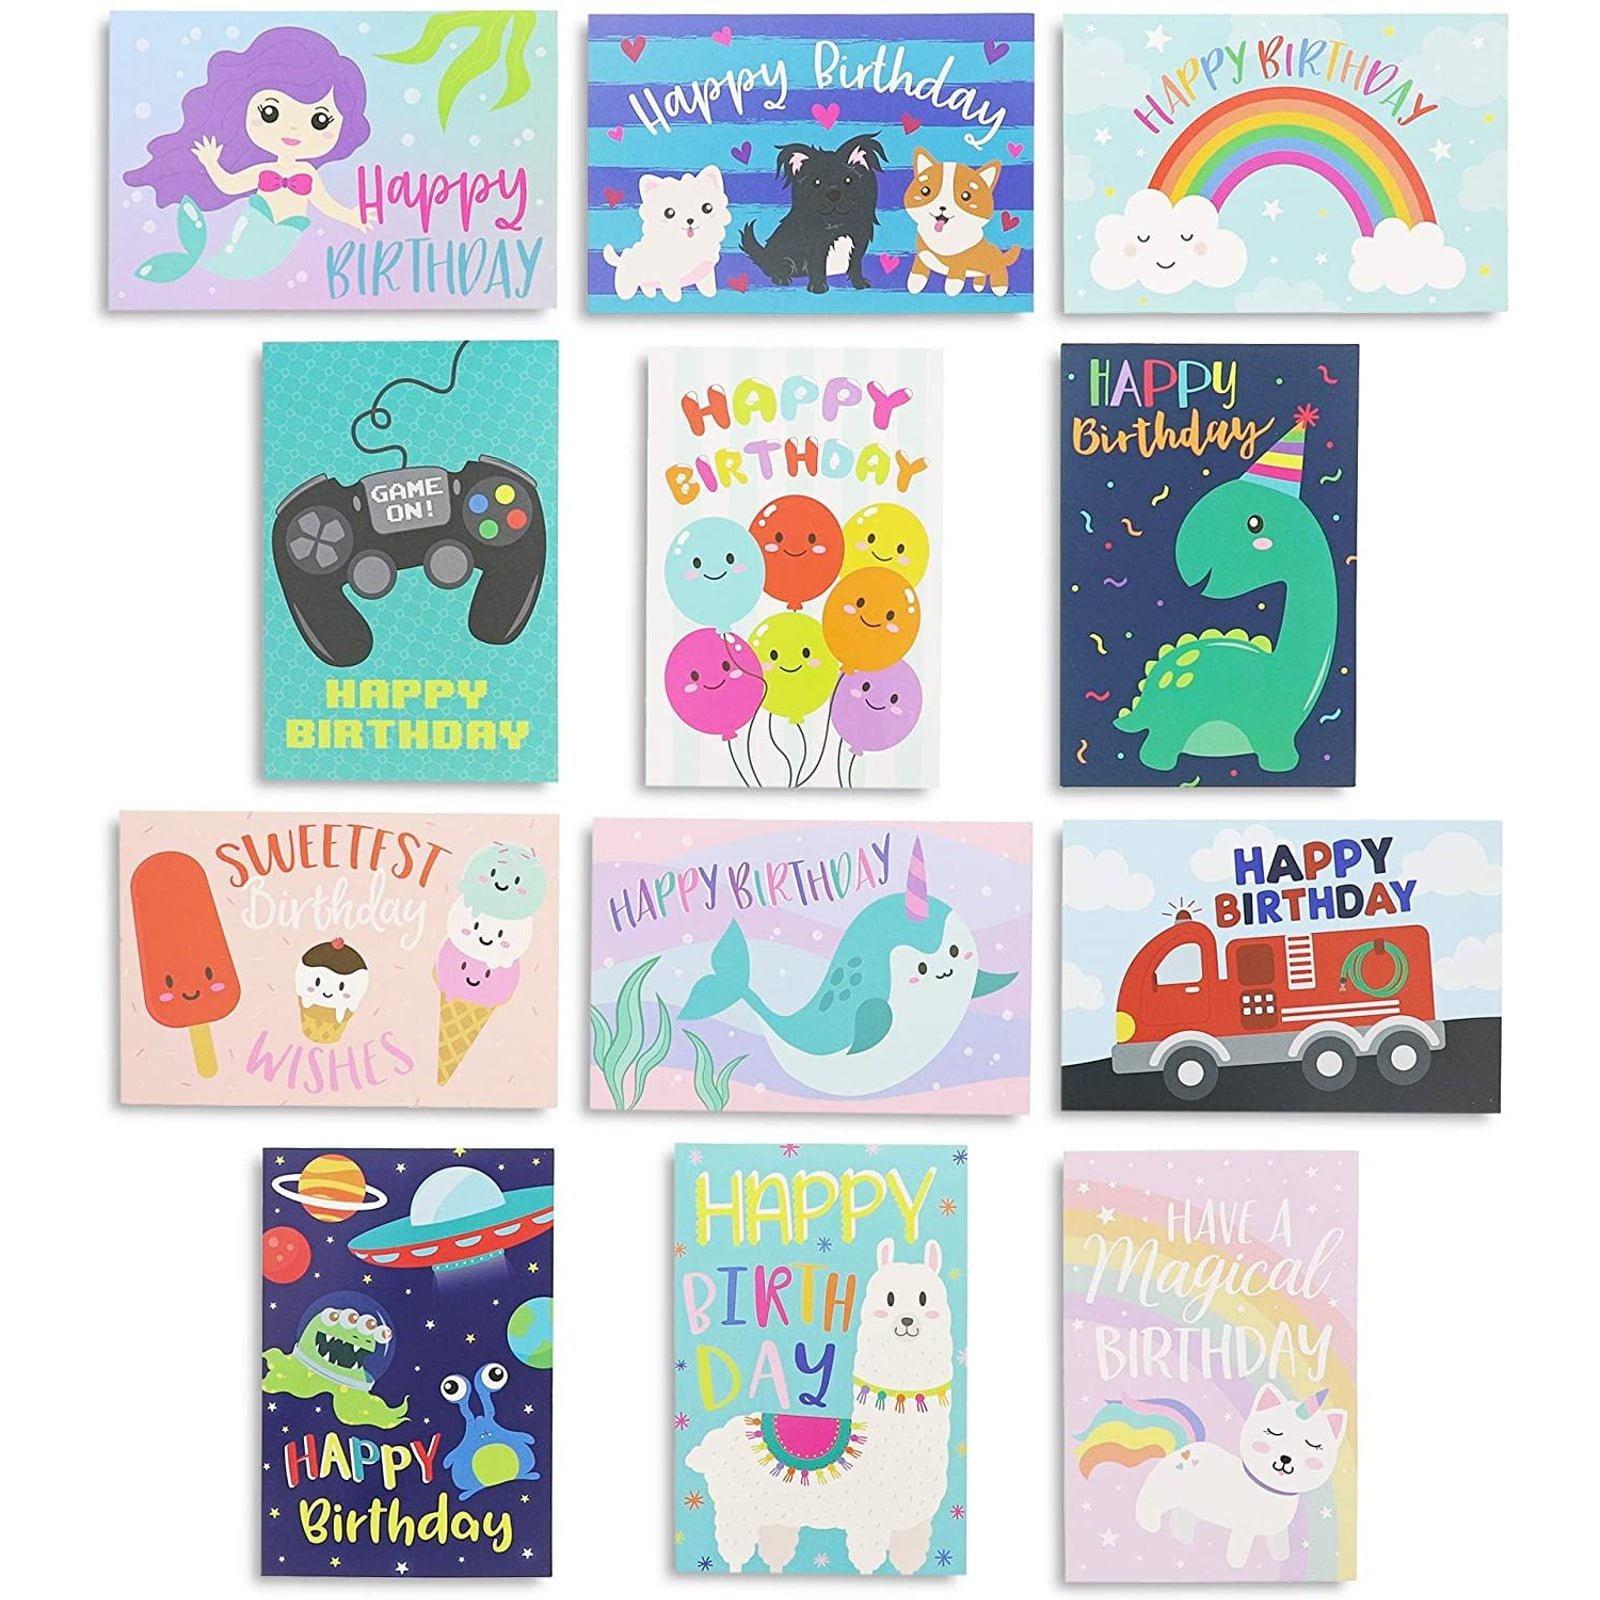 Five Different "Happy Birthday" Vintage Puzzle Greeting Cards & Envelopes. 5 